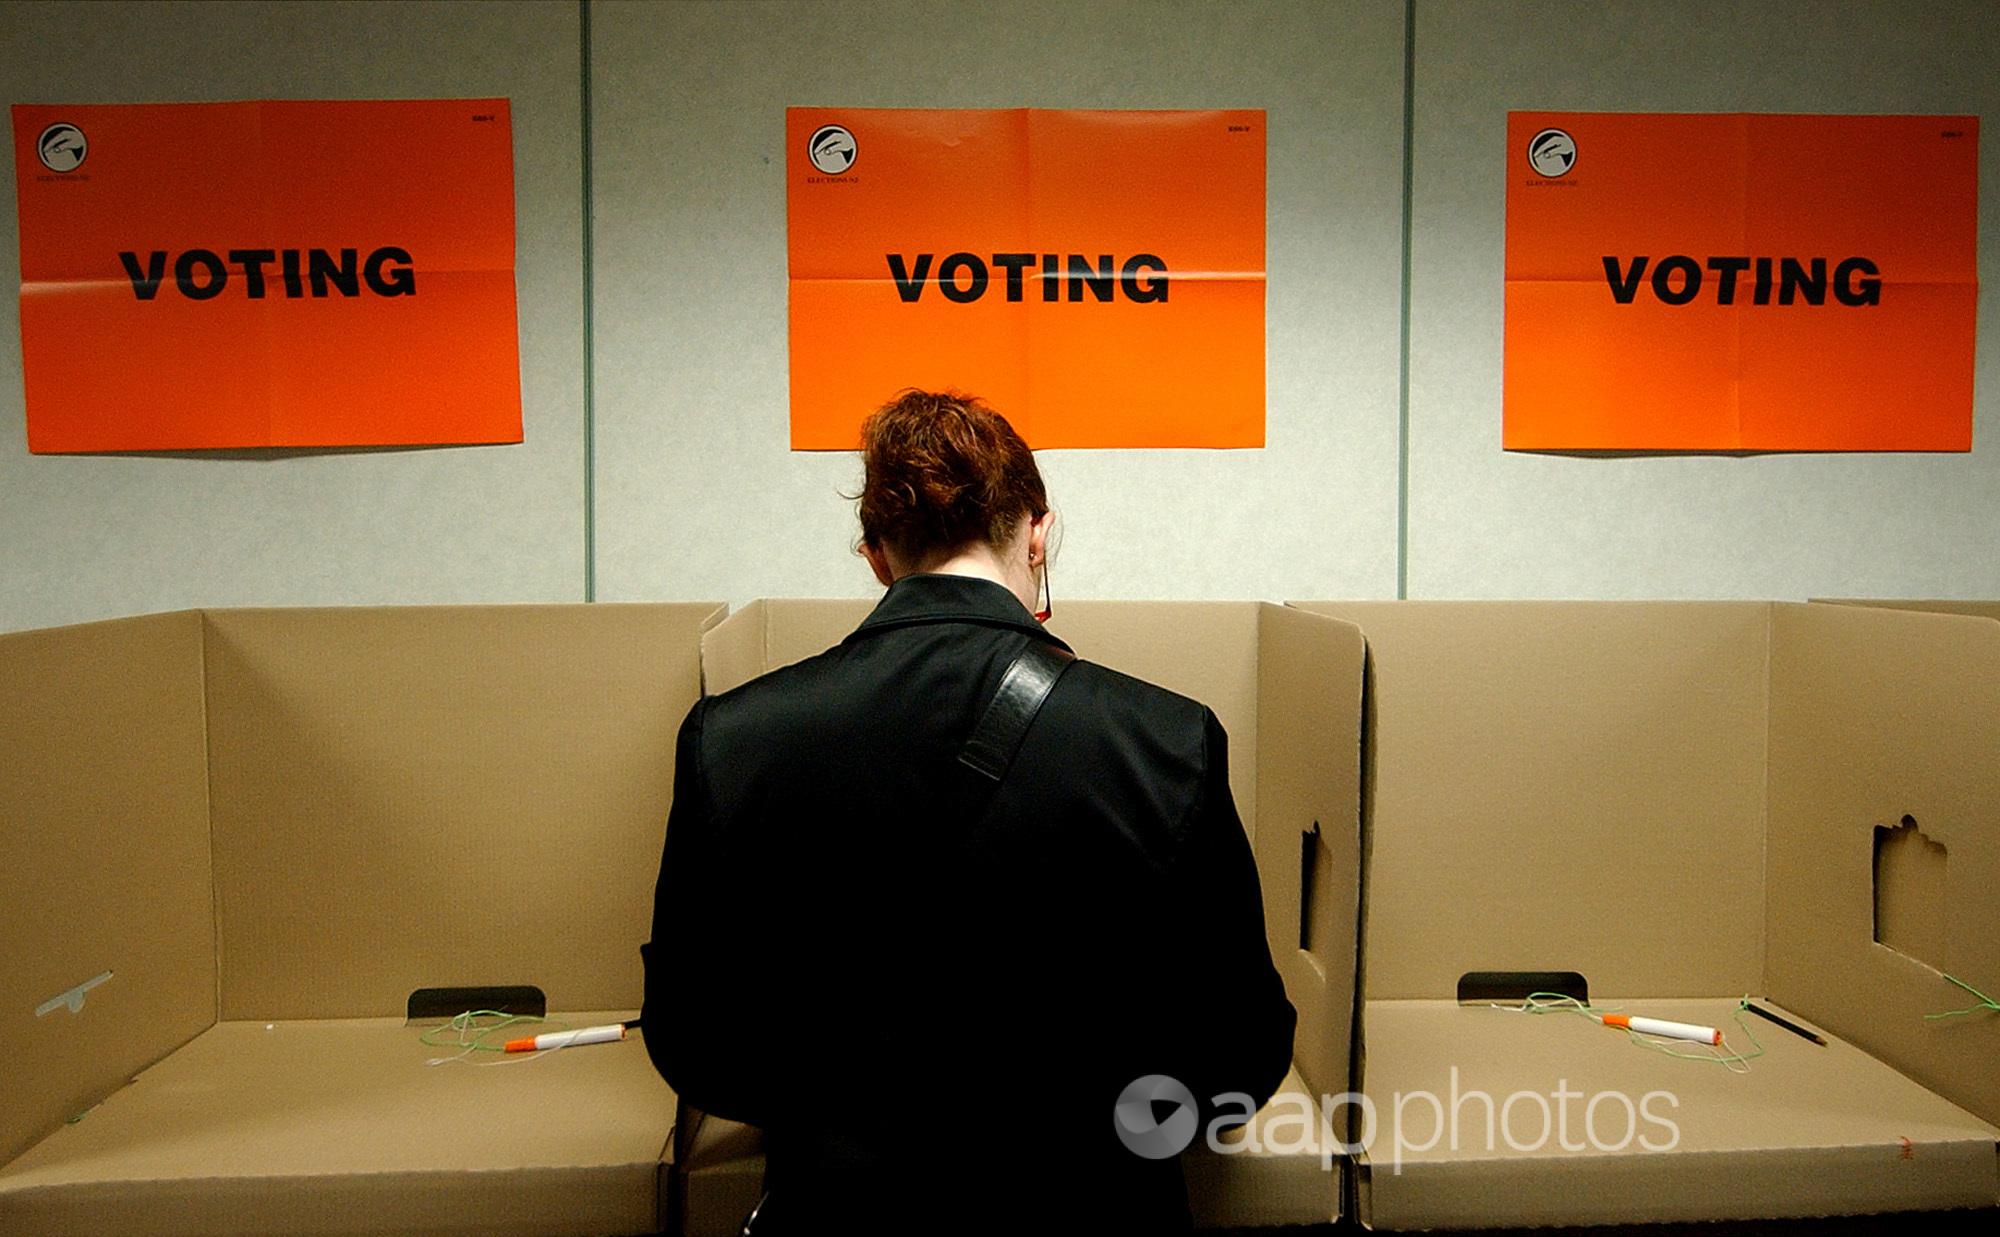 A person votes at the New Zealand general election